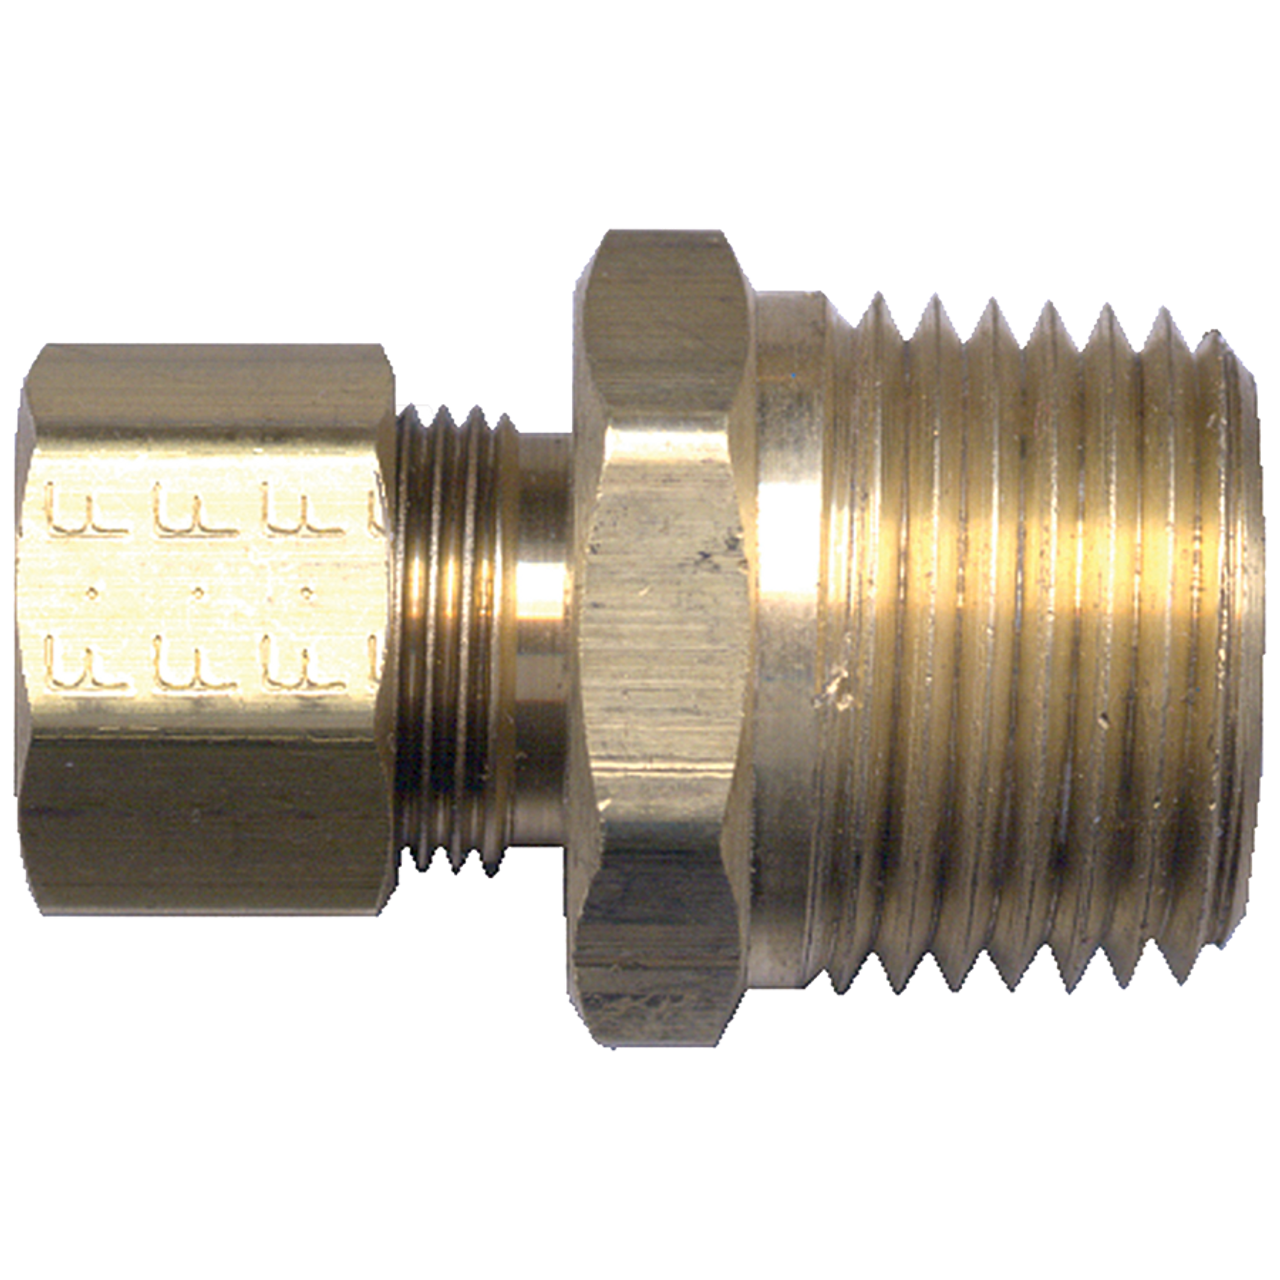 5/32 x 1/8" Brass Air Shift Compression - Male NPT Connector  868-2-1/2A